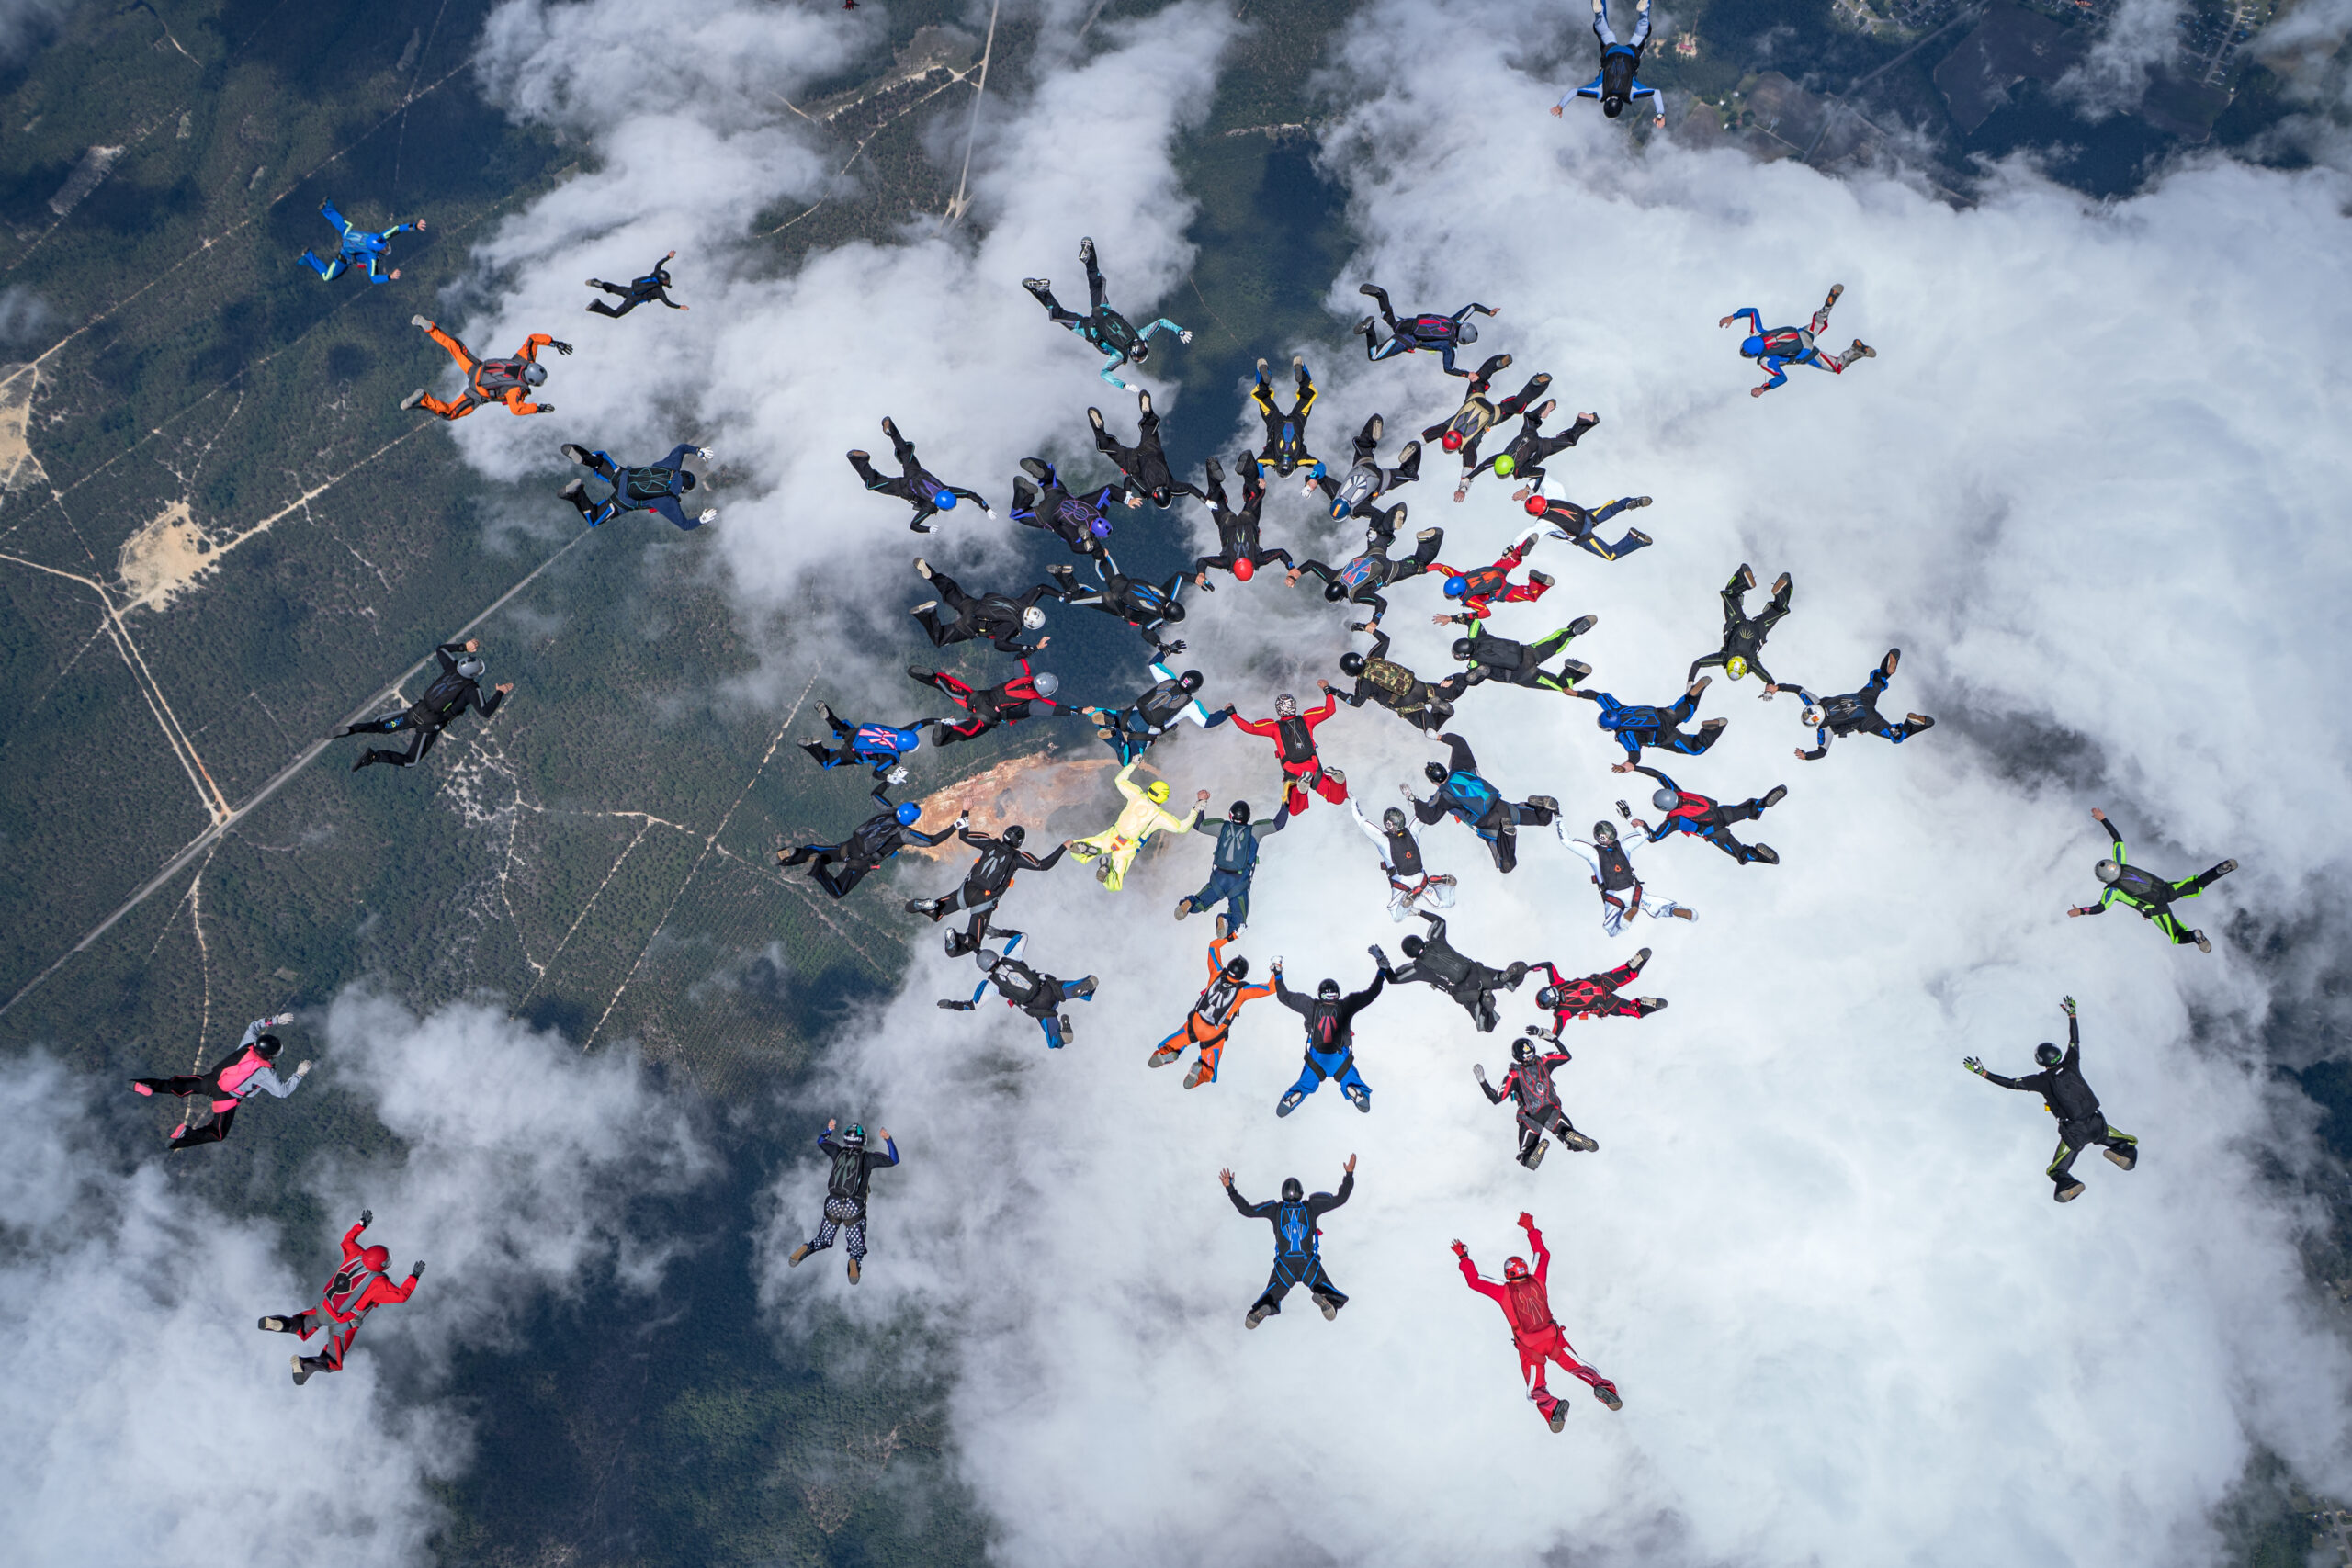 skydiving competition disciplines